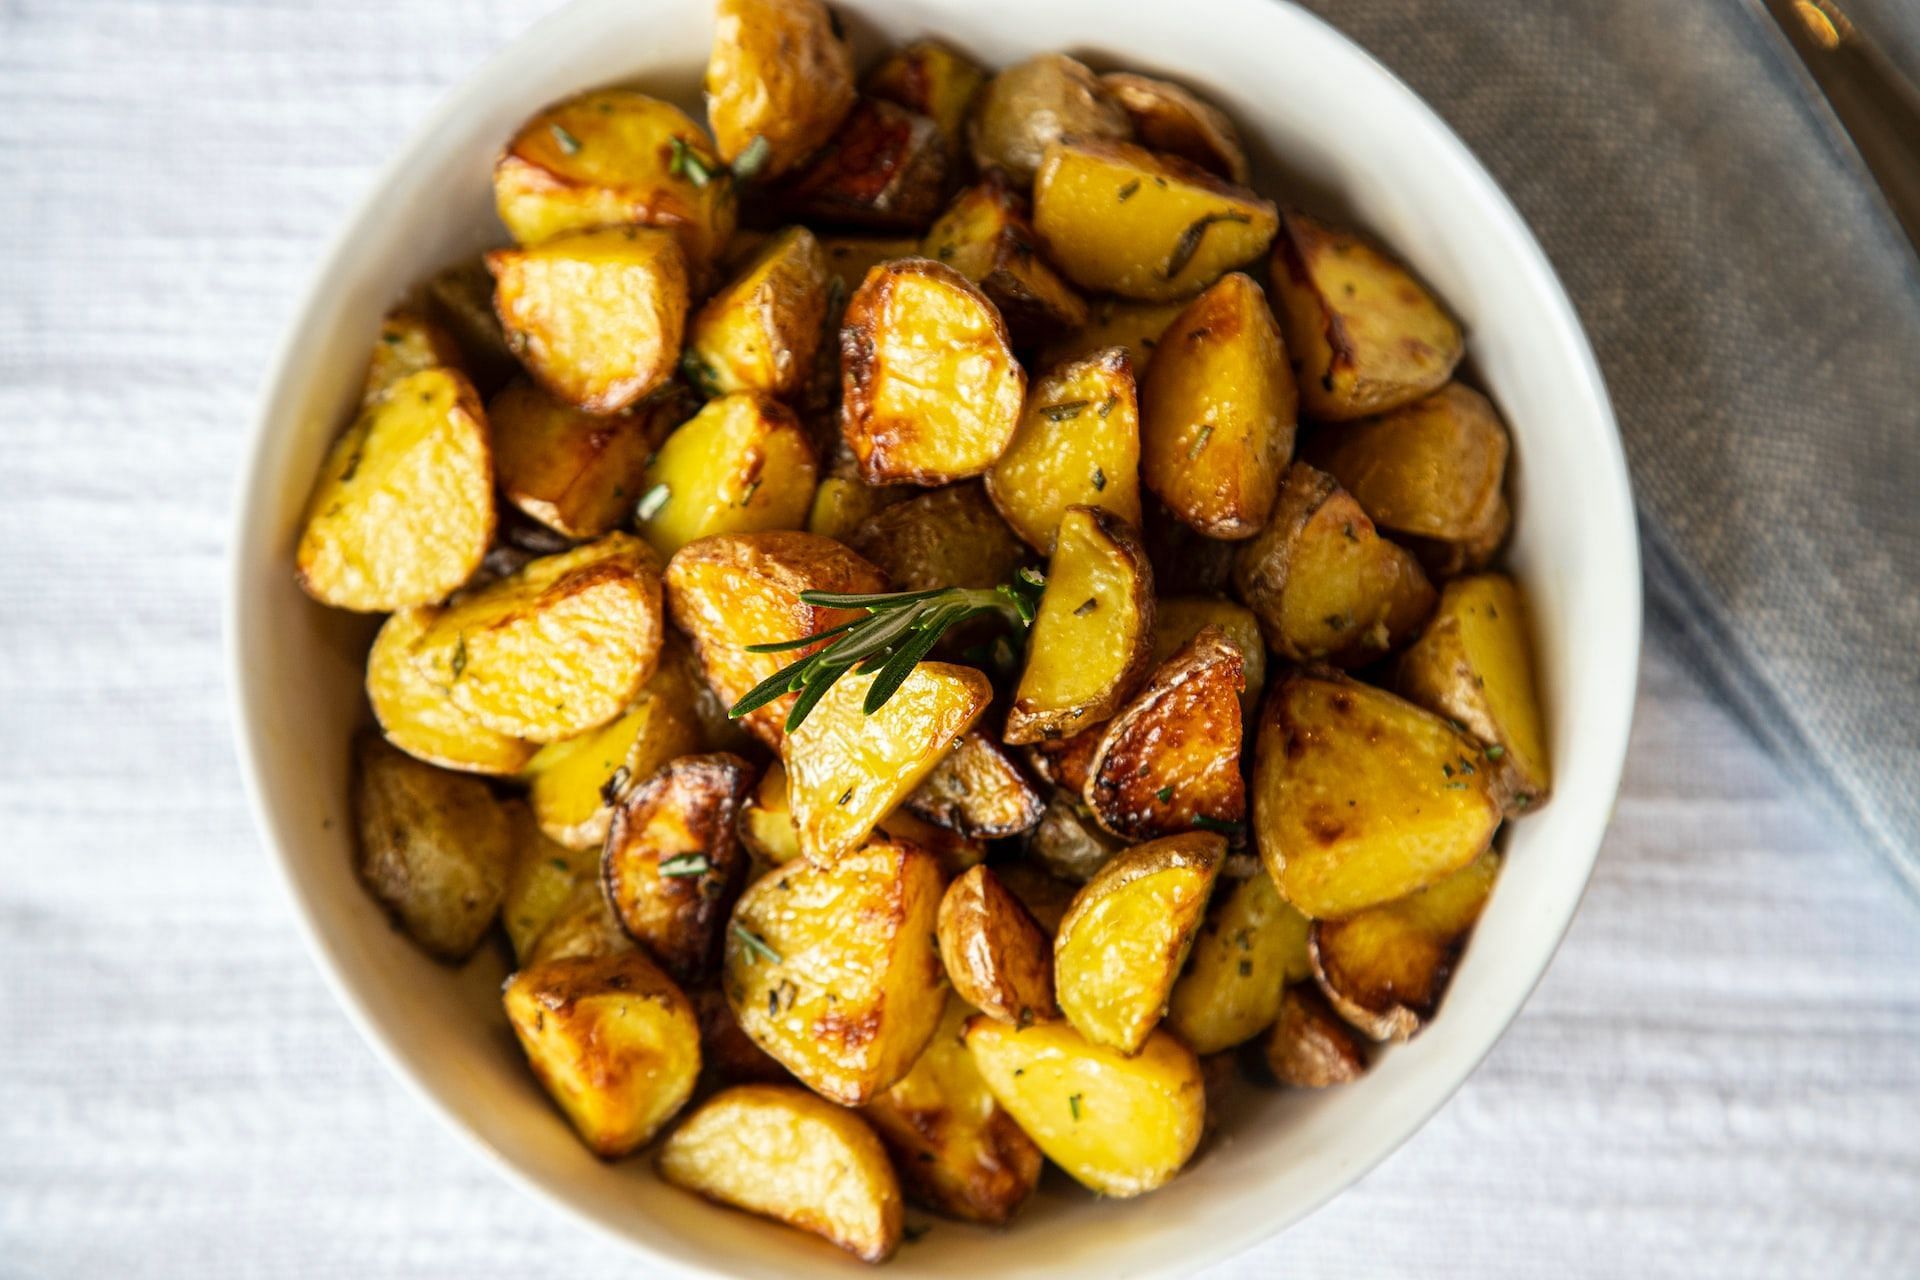 Potatoes and other starchy vegetables are rich in carbohydrates. (Photo via Unsplash/Clark Douglas)